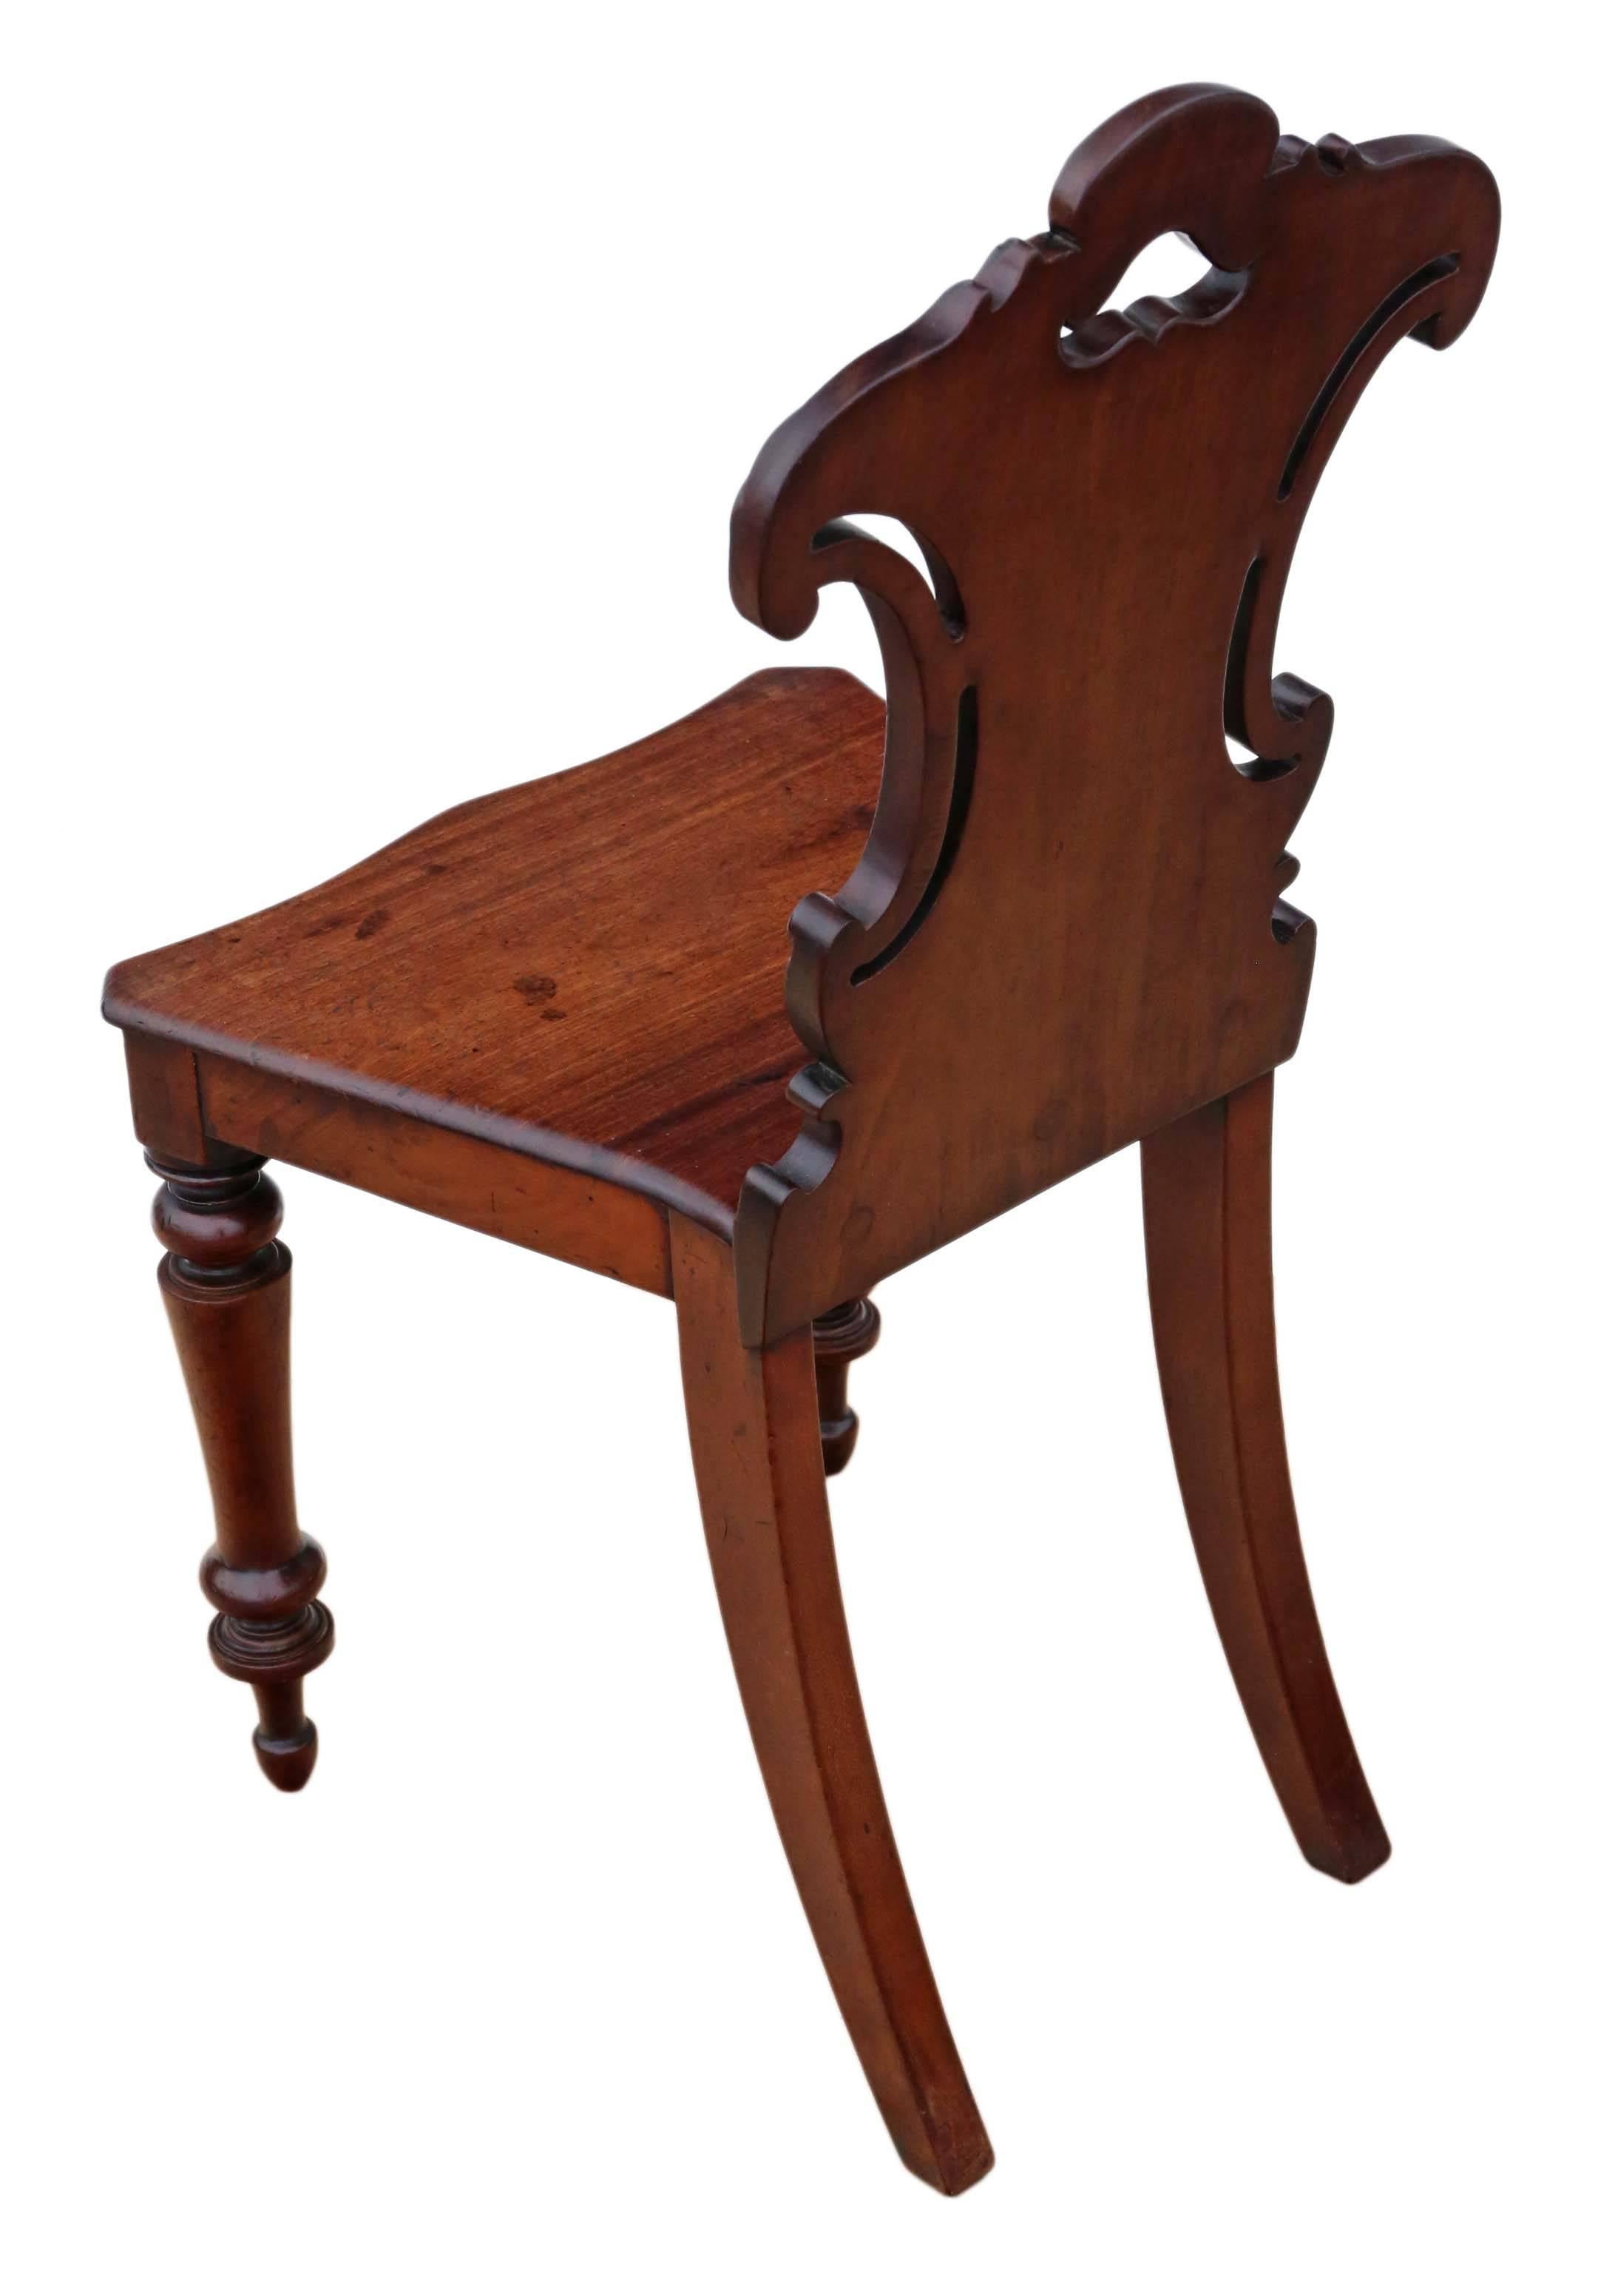 British Antique Victorian circa 1850-1870 Carved Mahogany Hall Chair For Sale